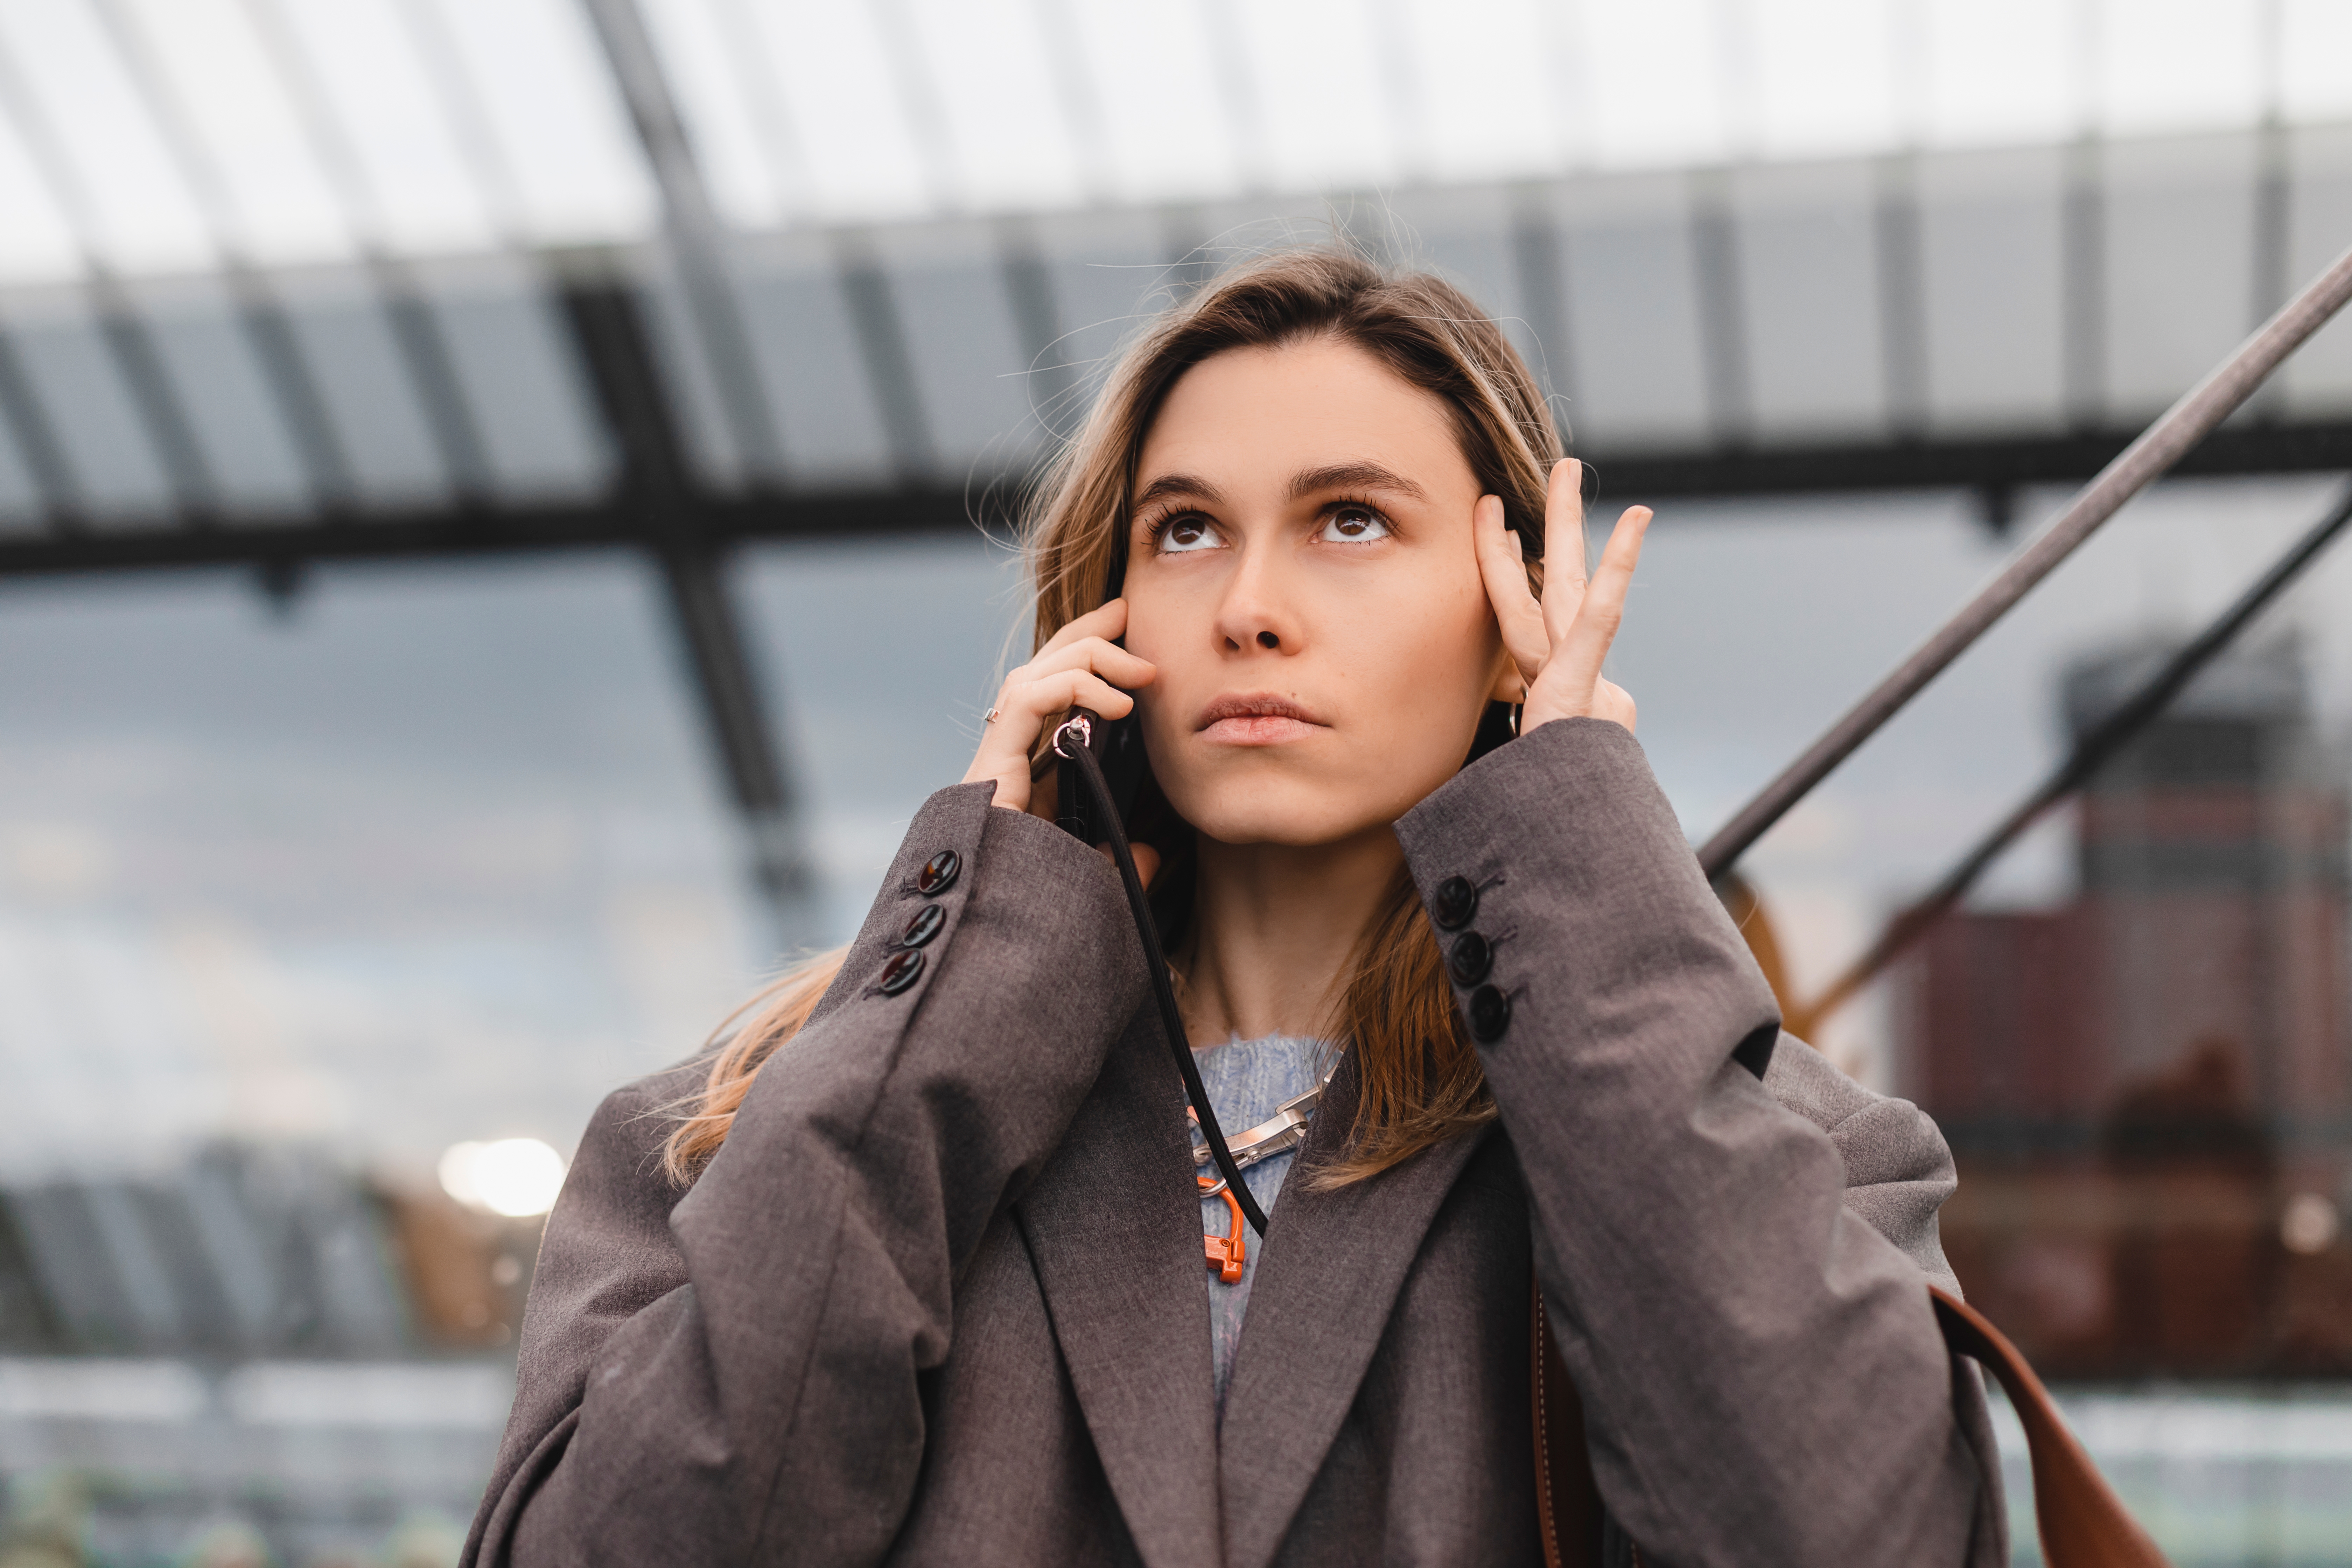 A stressed woman | Source: Shutterstock